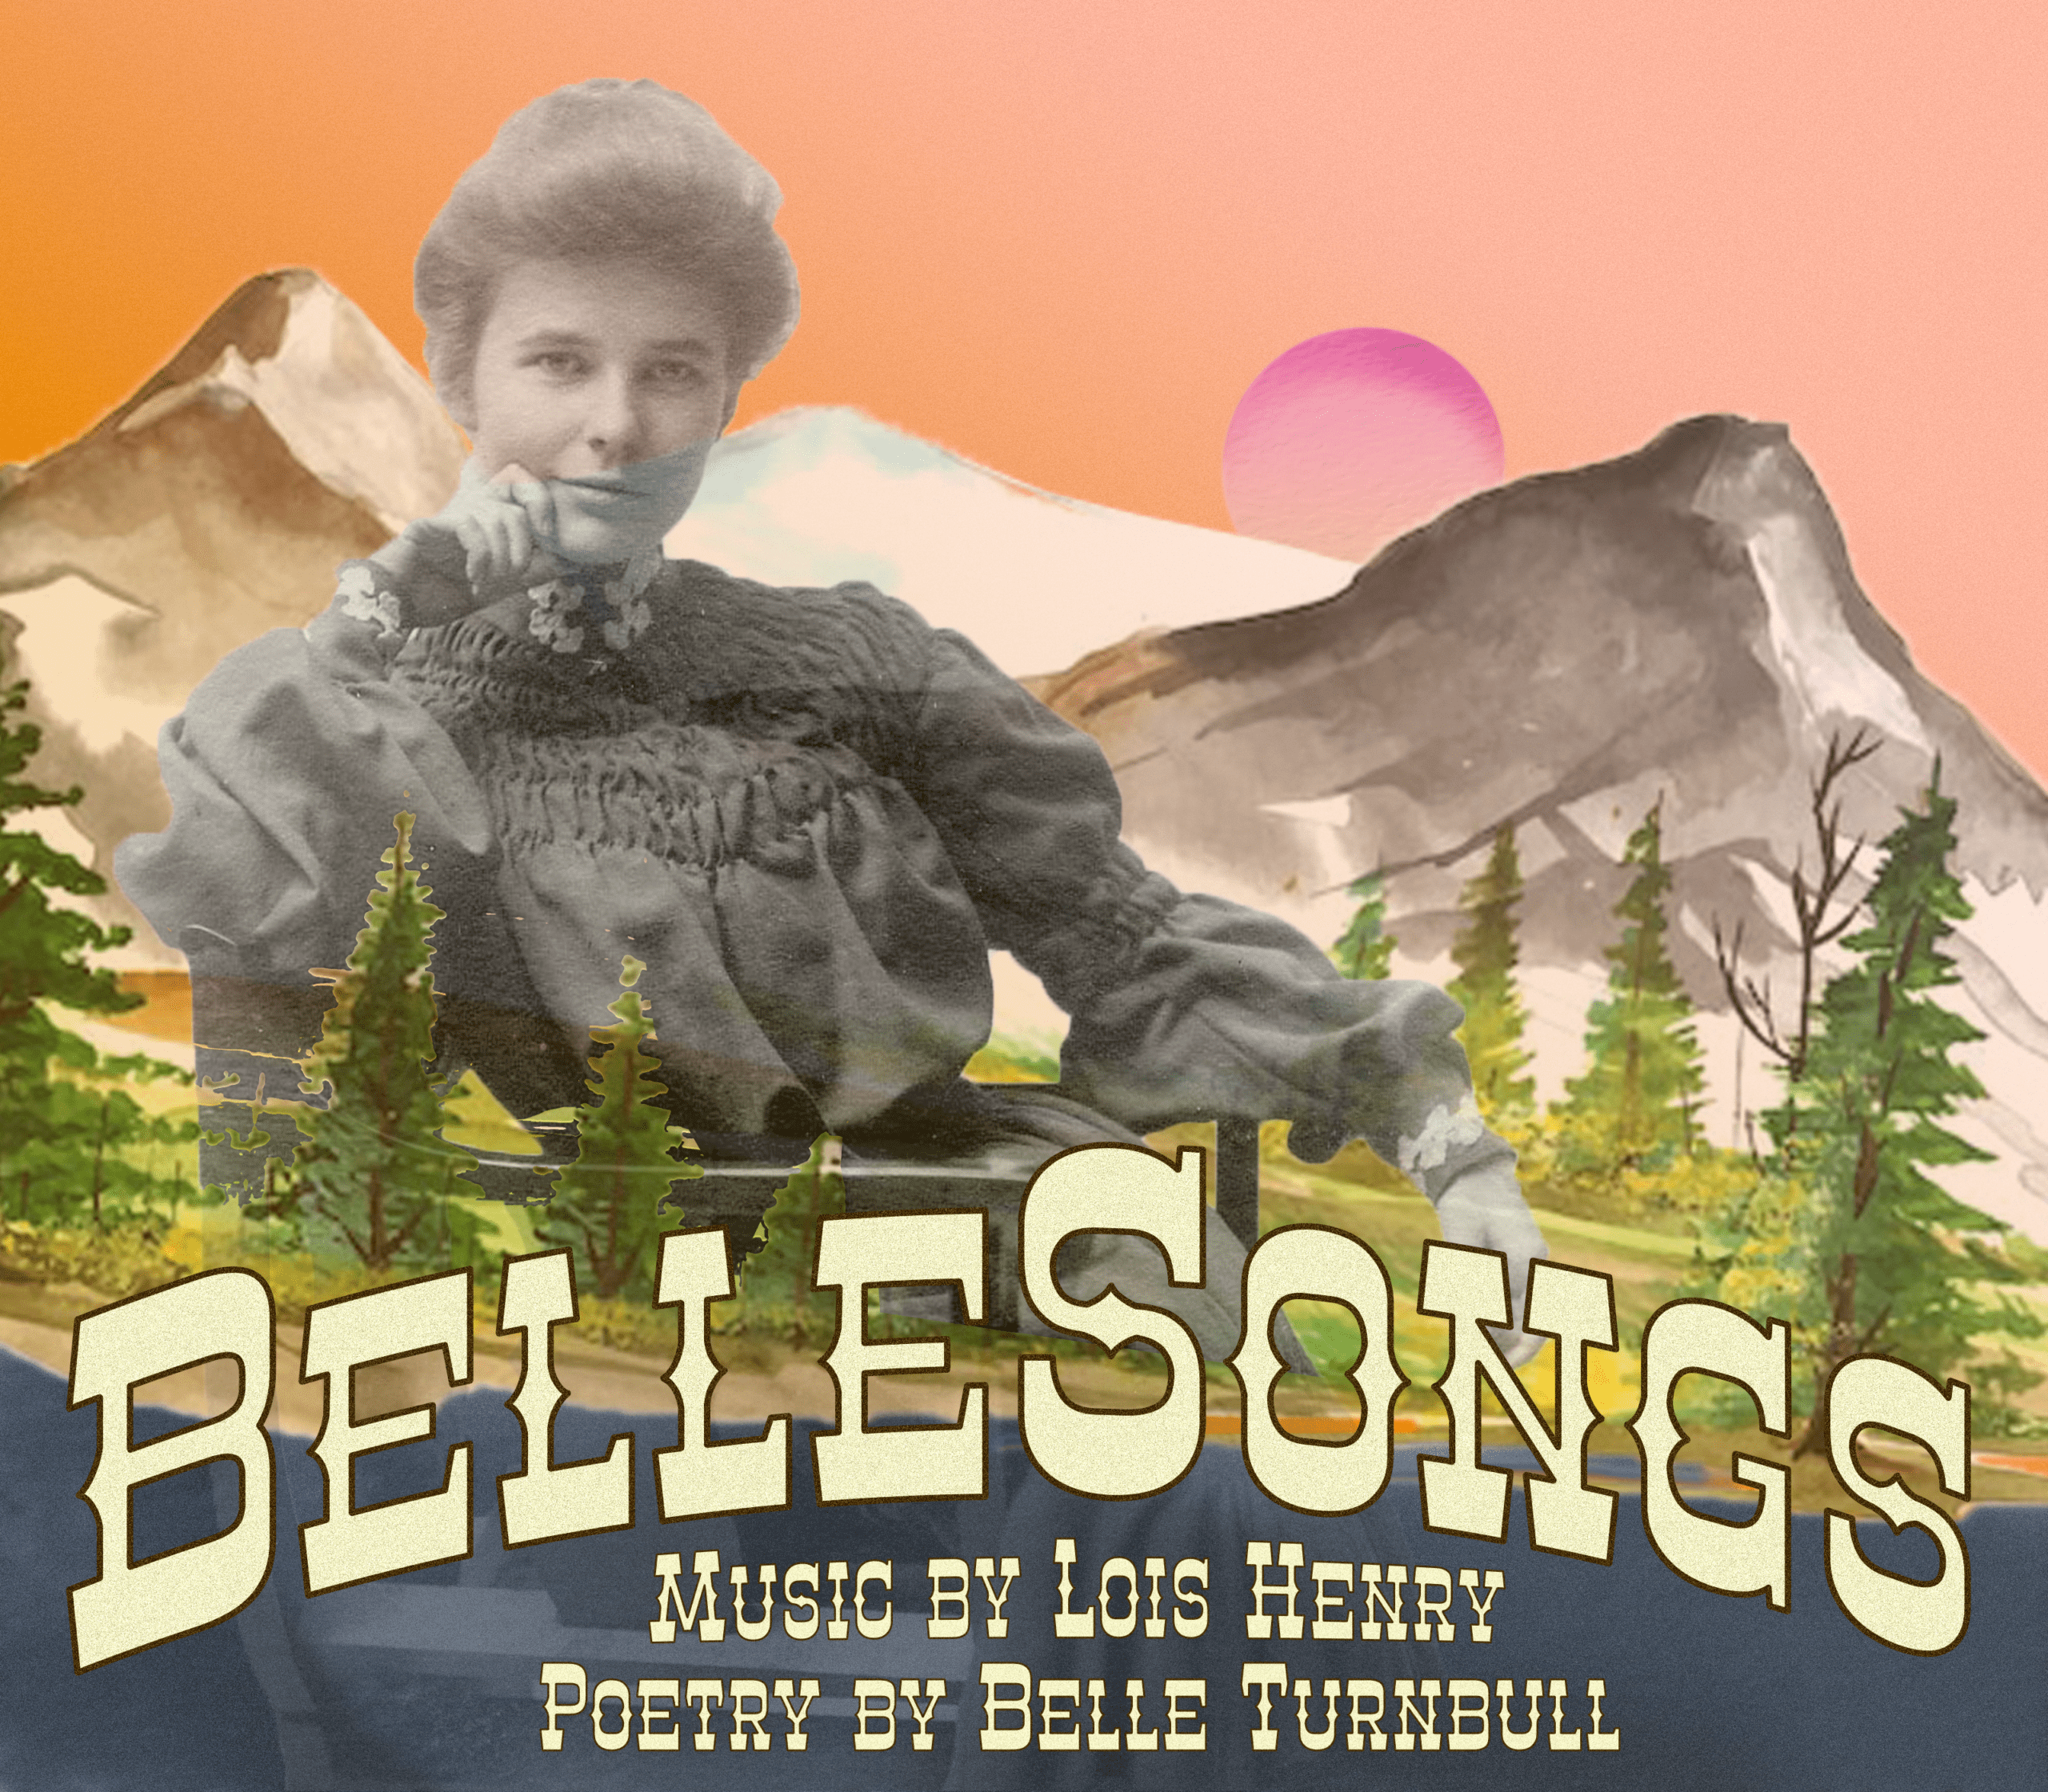 Opera Las Vega's poster for BelleSongs, showing the image of Belle Turnbull overlaid against a painting of mountains at sunset.